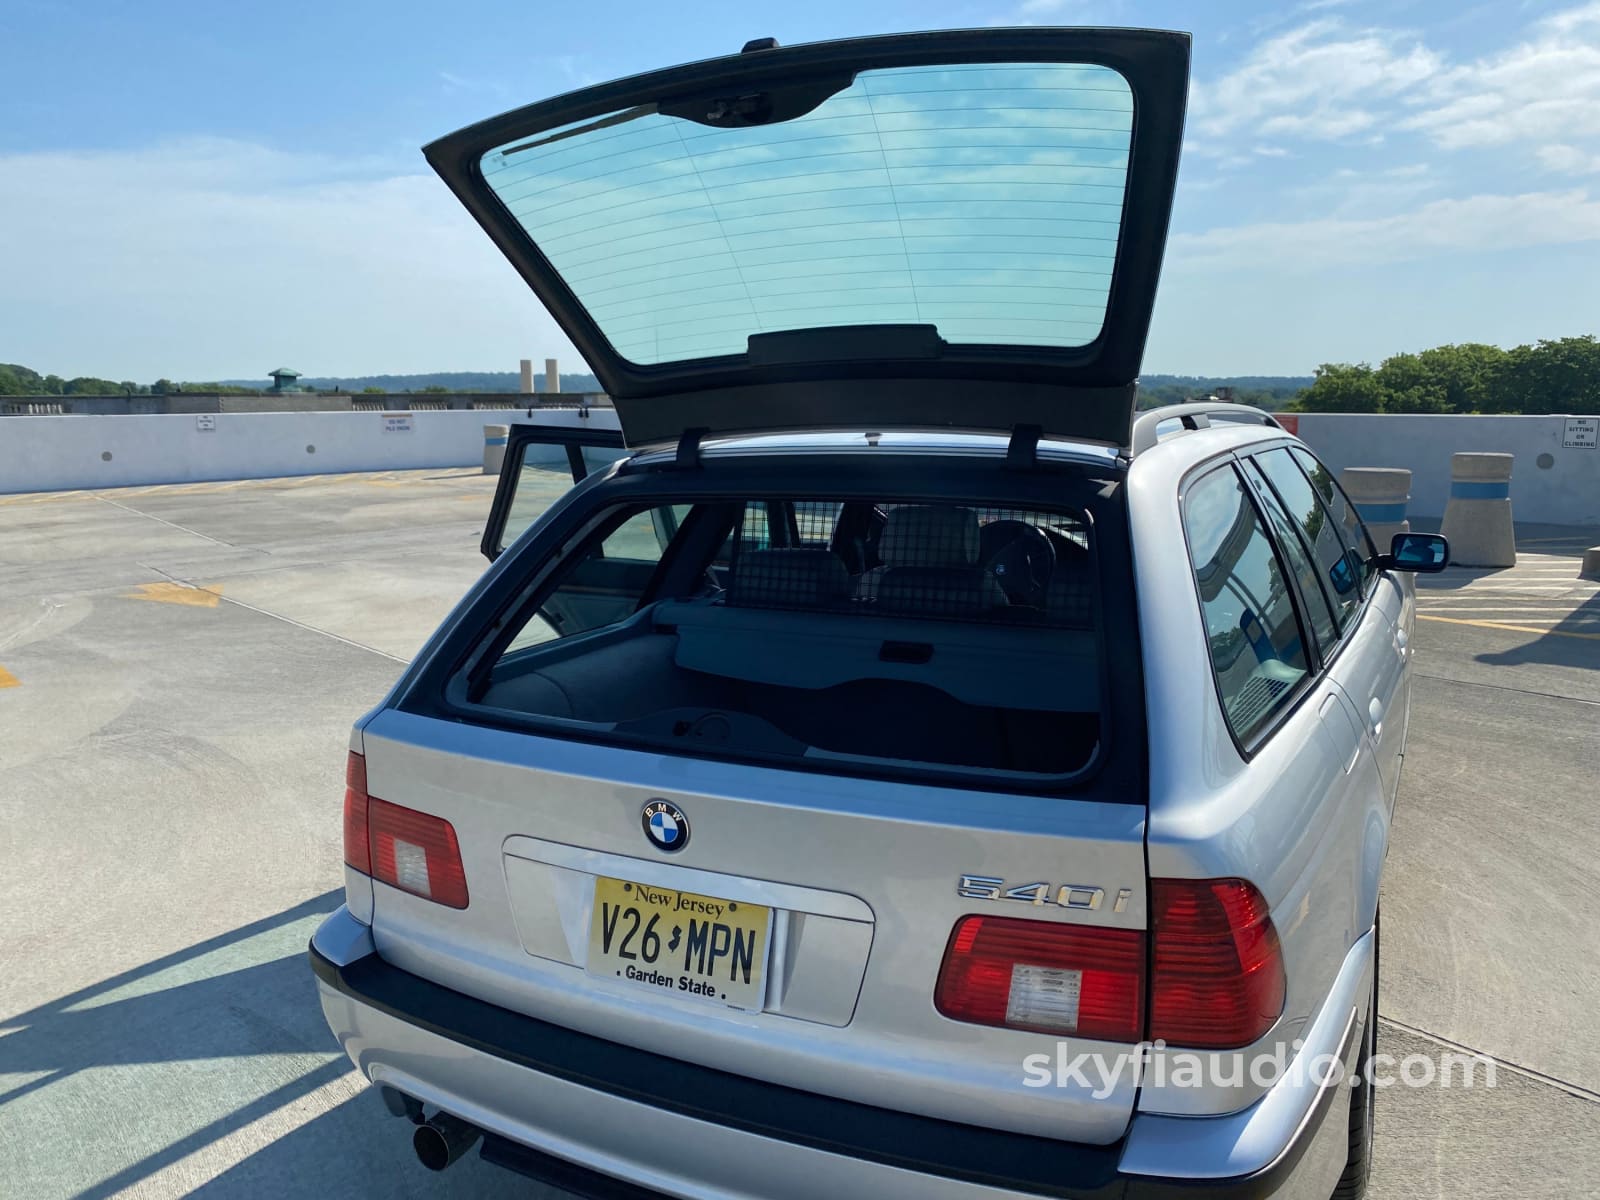 2003 Bmw E39 540I Sport Wagon M-Sport - 1 Of 189 In The Usa Vehicle